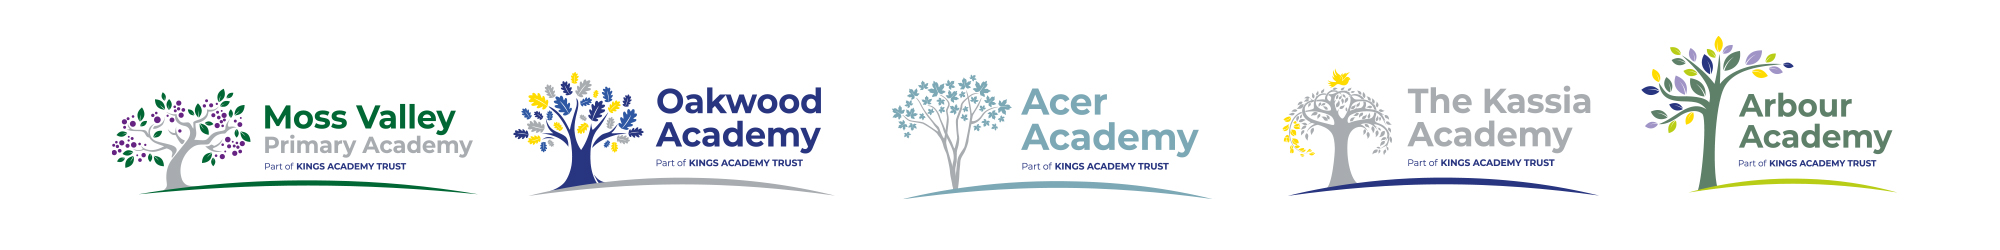 Five school logo designs each featuring trees for Kings Academy Trust part of a multi academy trust rebrand